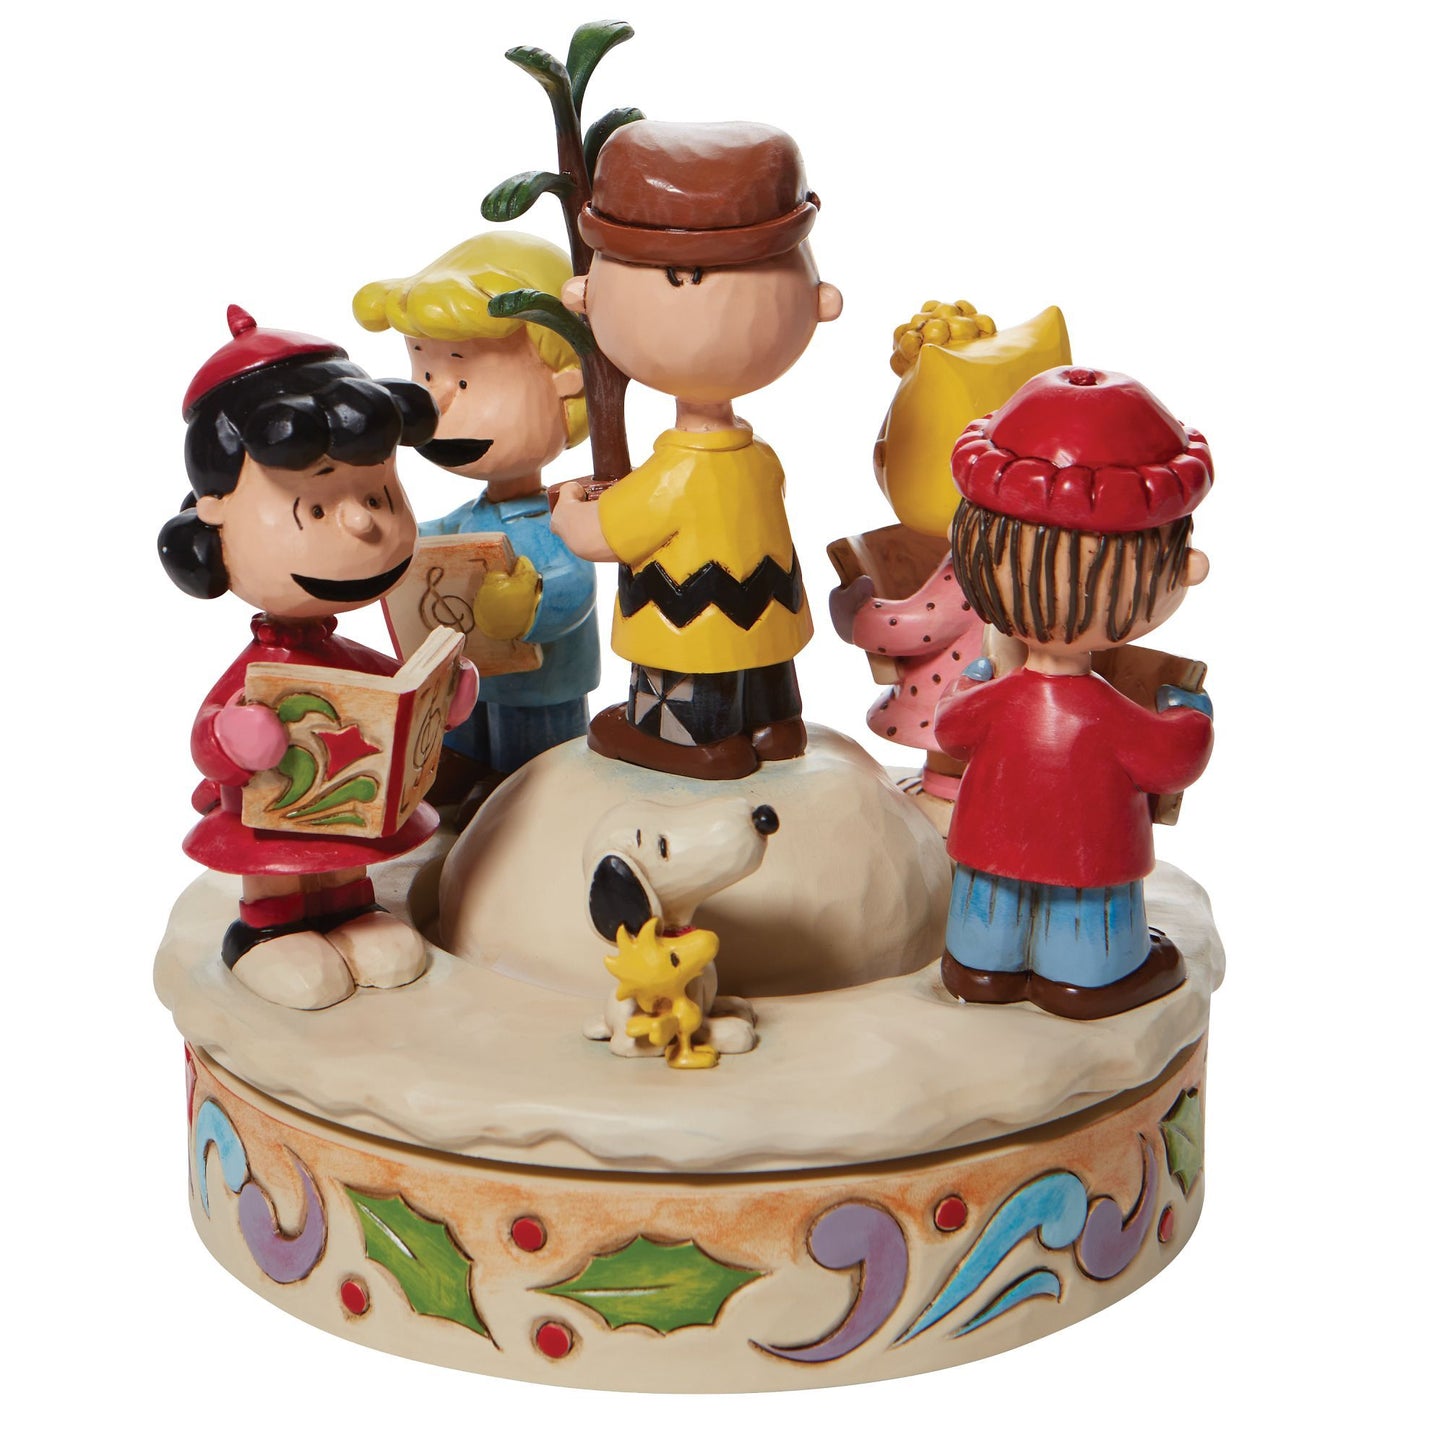 Band Friends around Christmas Peanuts by Jim Shore